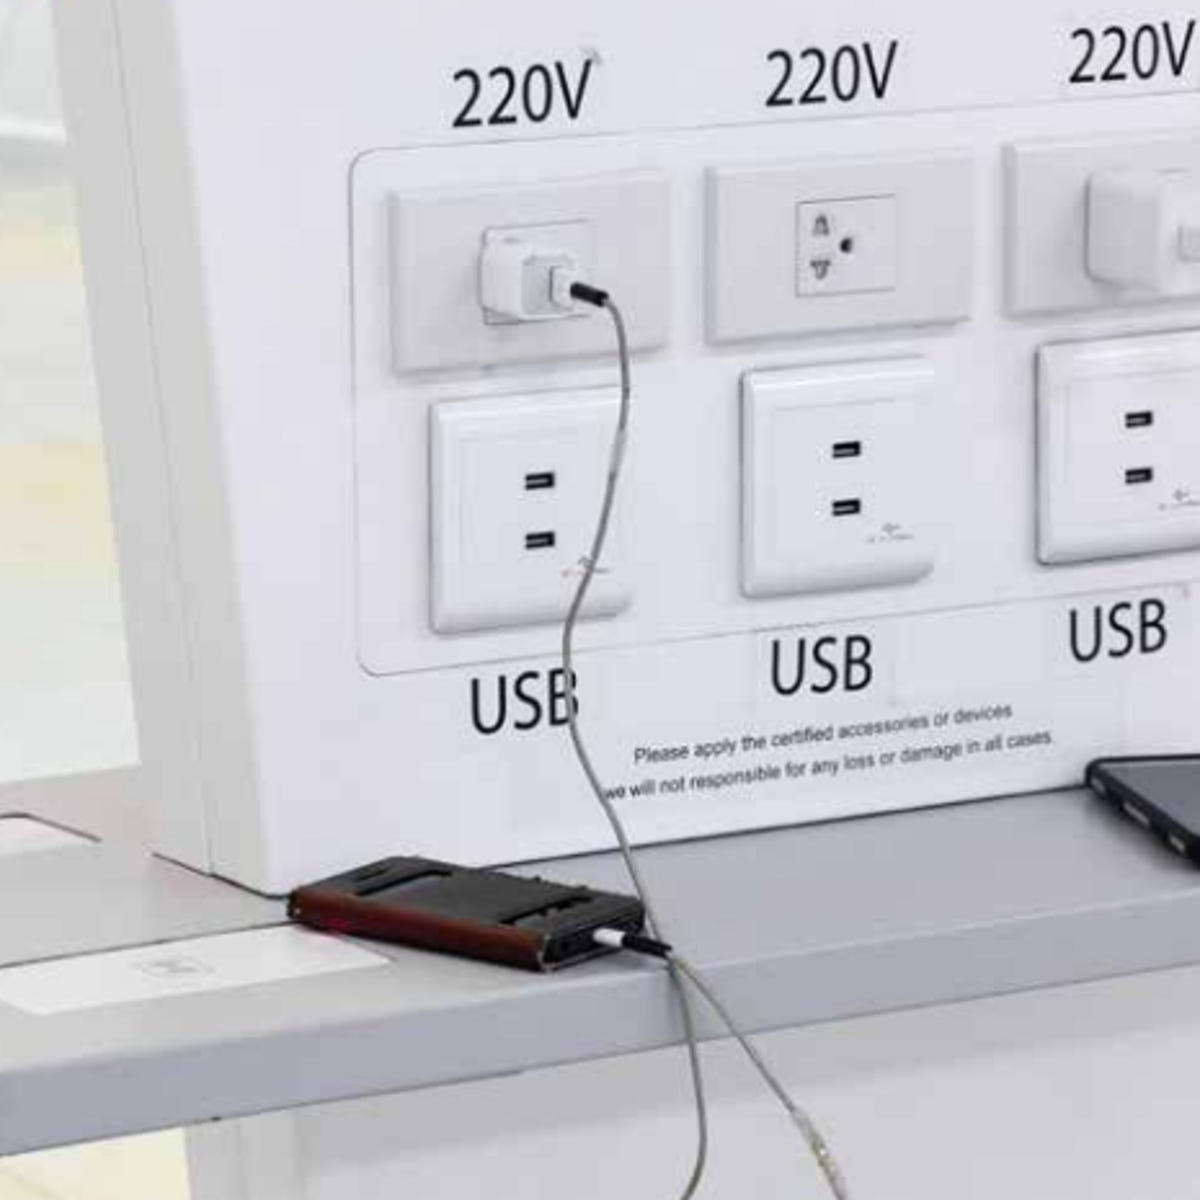 Officials warn about the dangers of using public USB charging